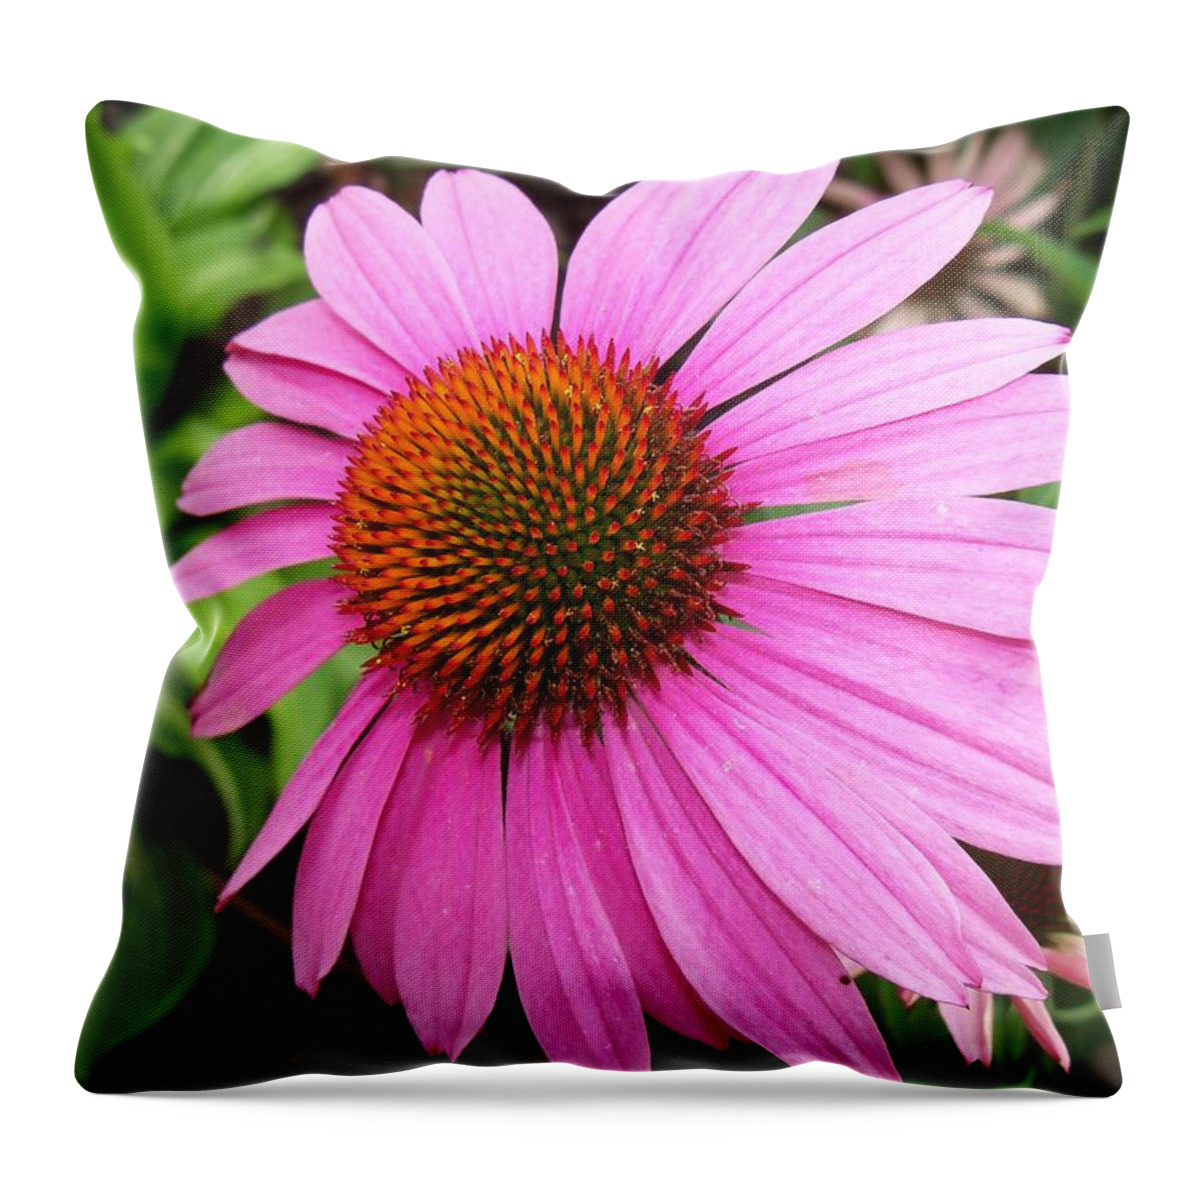 Flower Throw Pillow featuring the photograph Cone Flower #1 by Corinne Elizabeth Cowherd